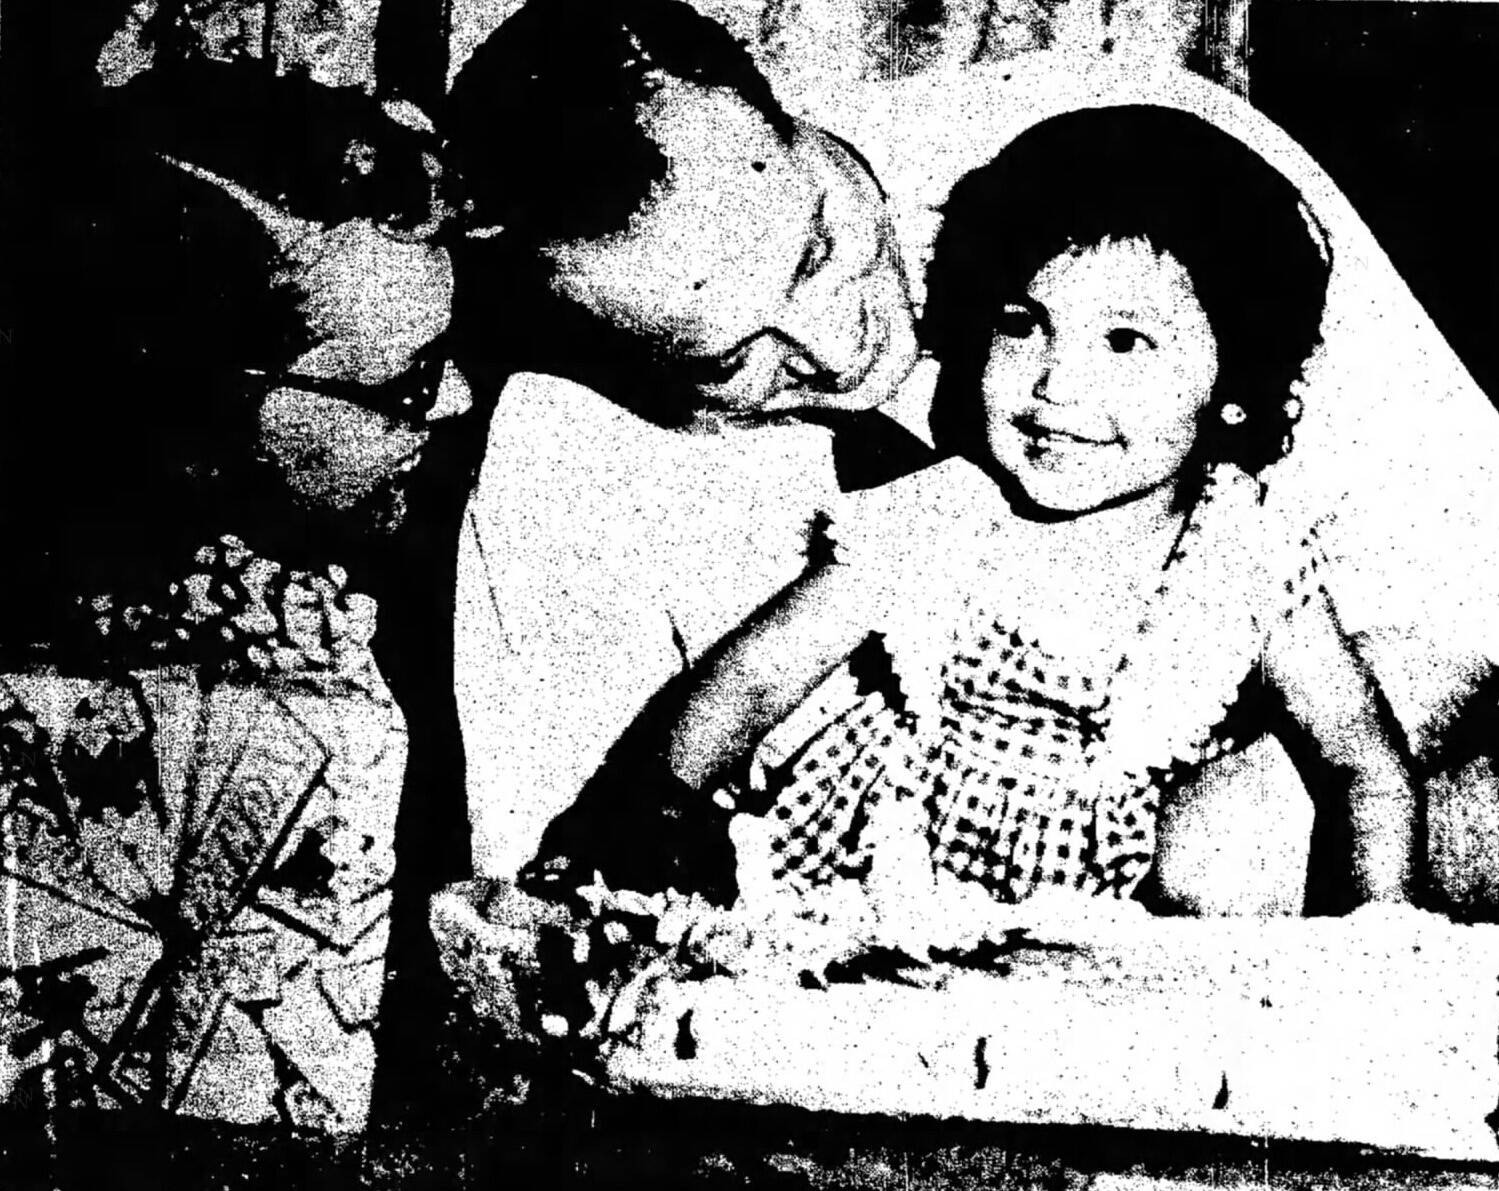 Ruth Ann and Oscar Pederson share smiles with young Vicky, a foster daughter they were trying to adopt in 1954. This front-page photograph appeared in the Fairbanks Daily News-Miner on June 17, 1954.